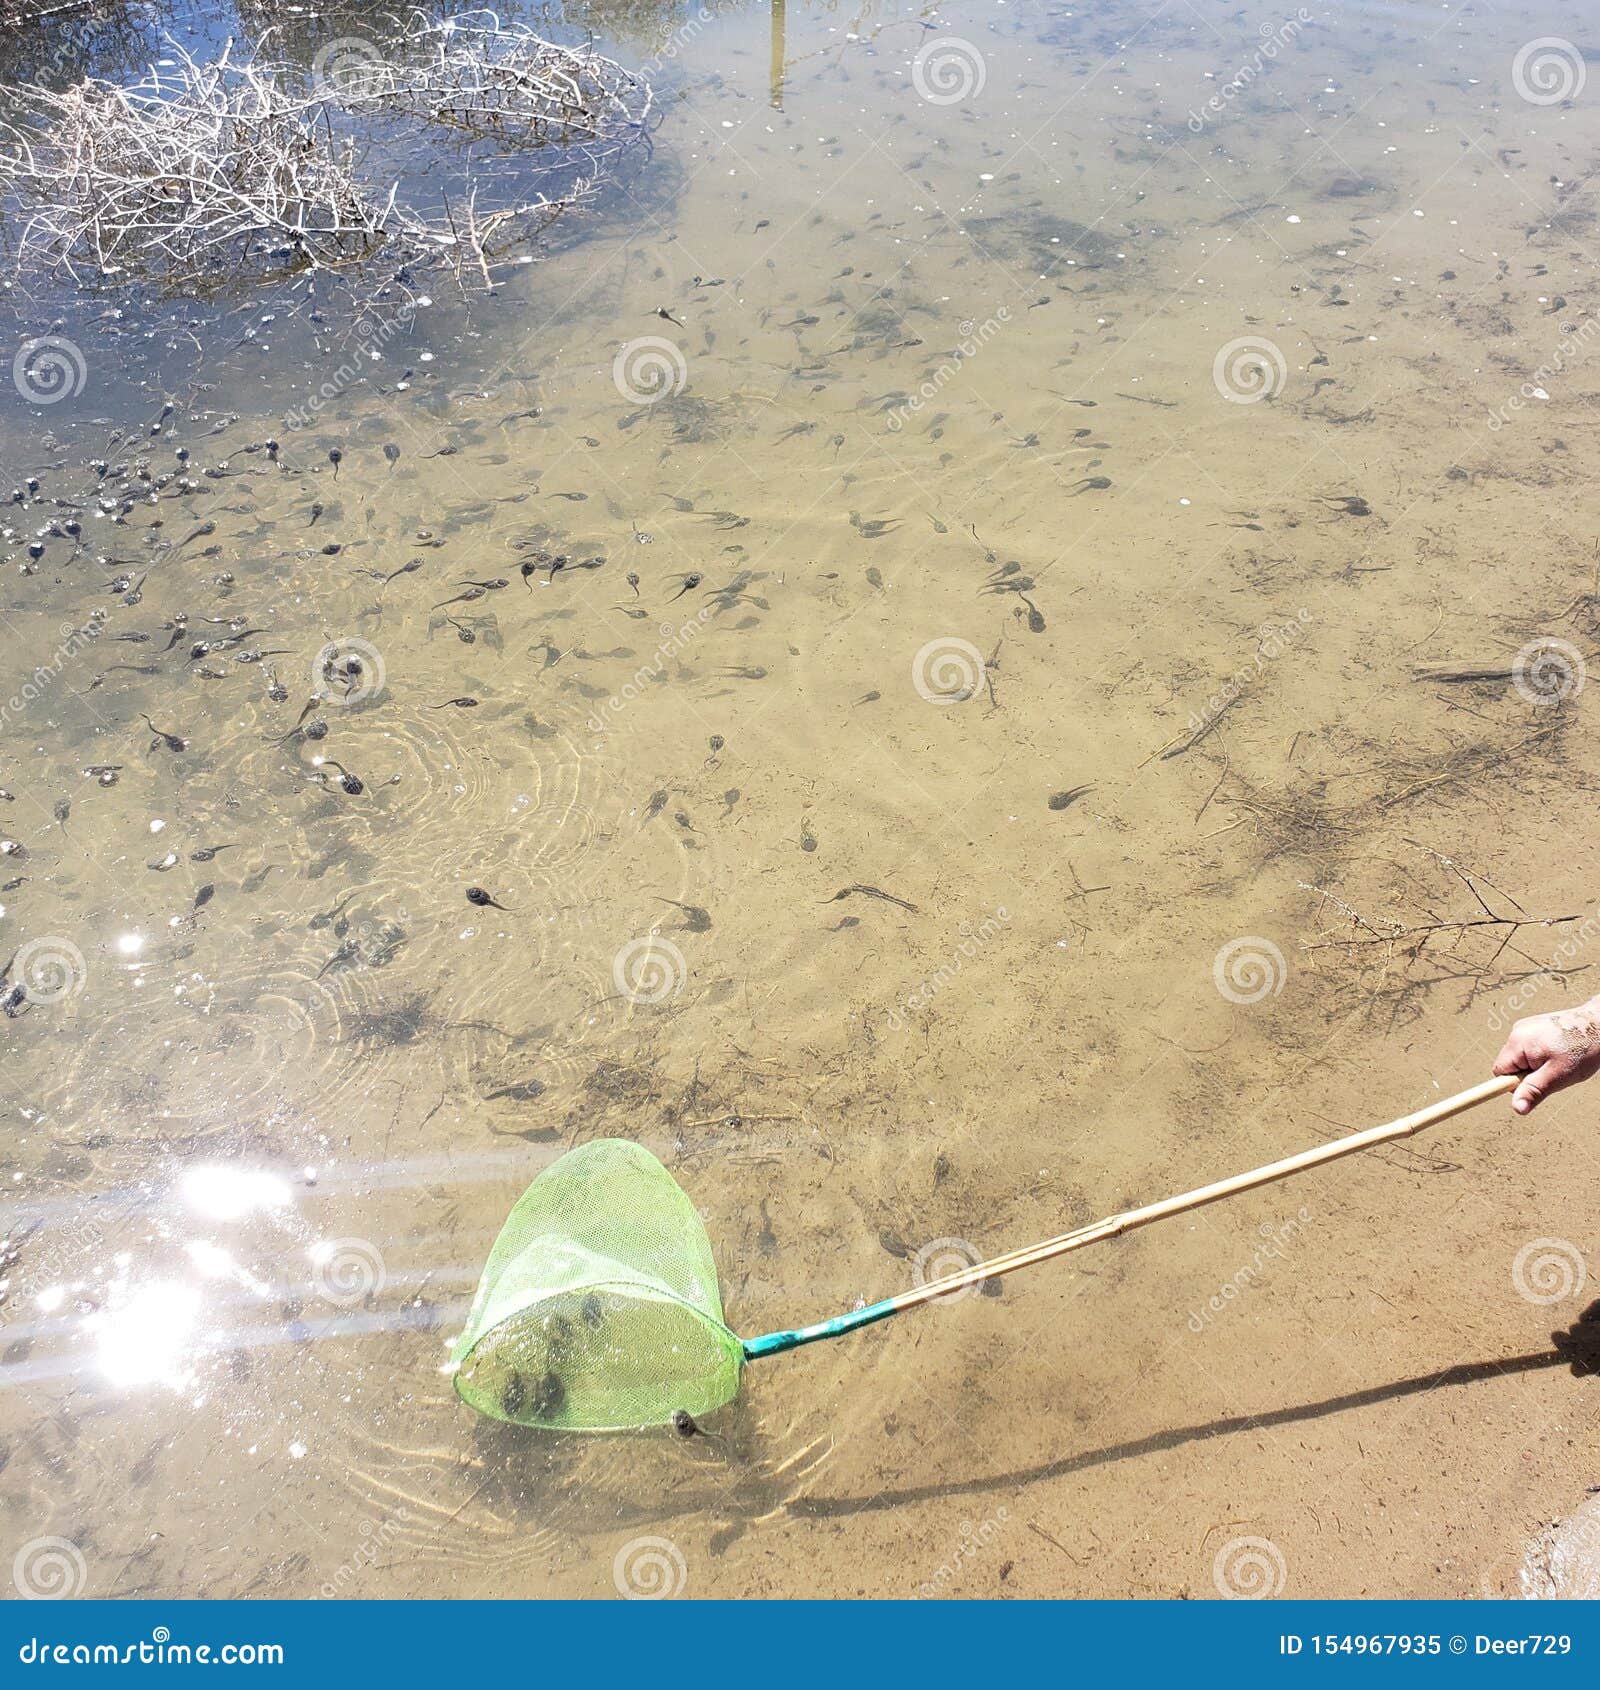 Catching Tadpoles with a Net Stock Image - Image of swim, crowded